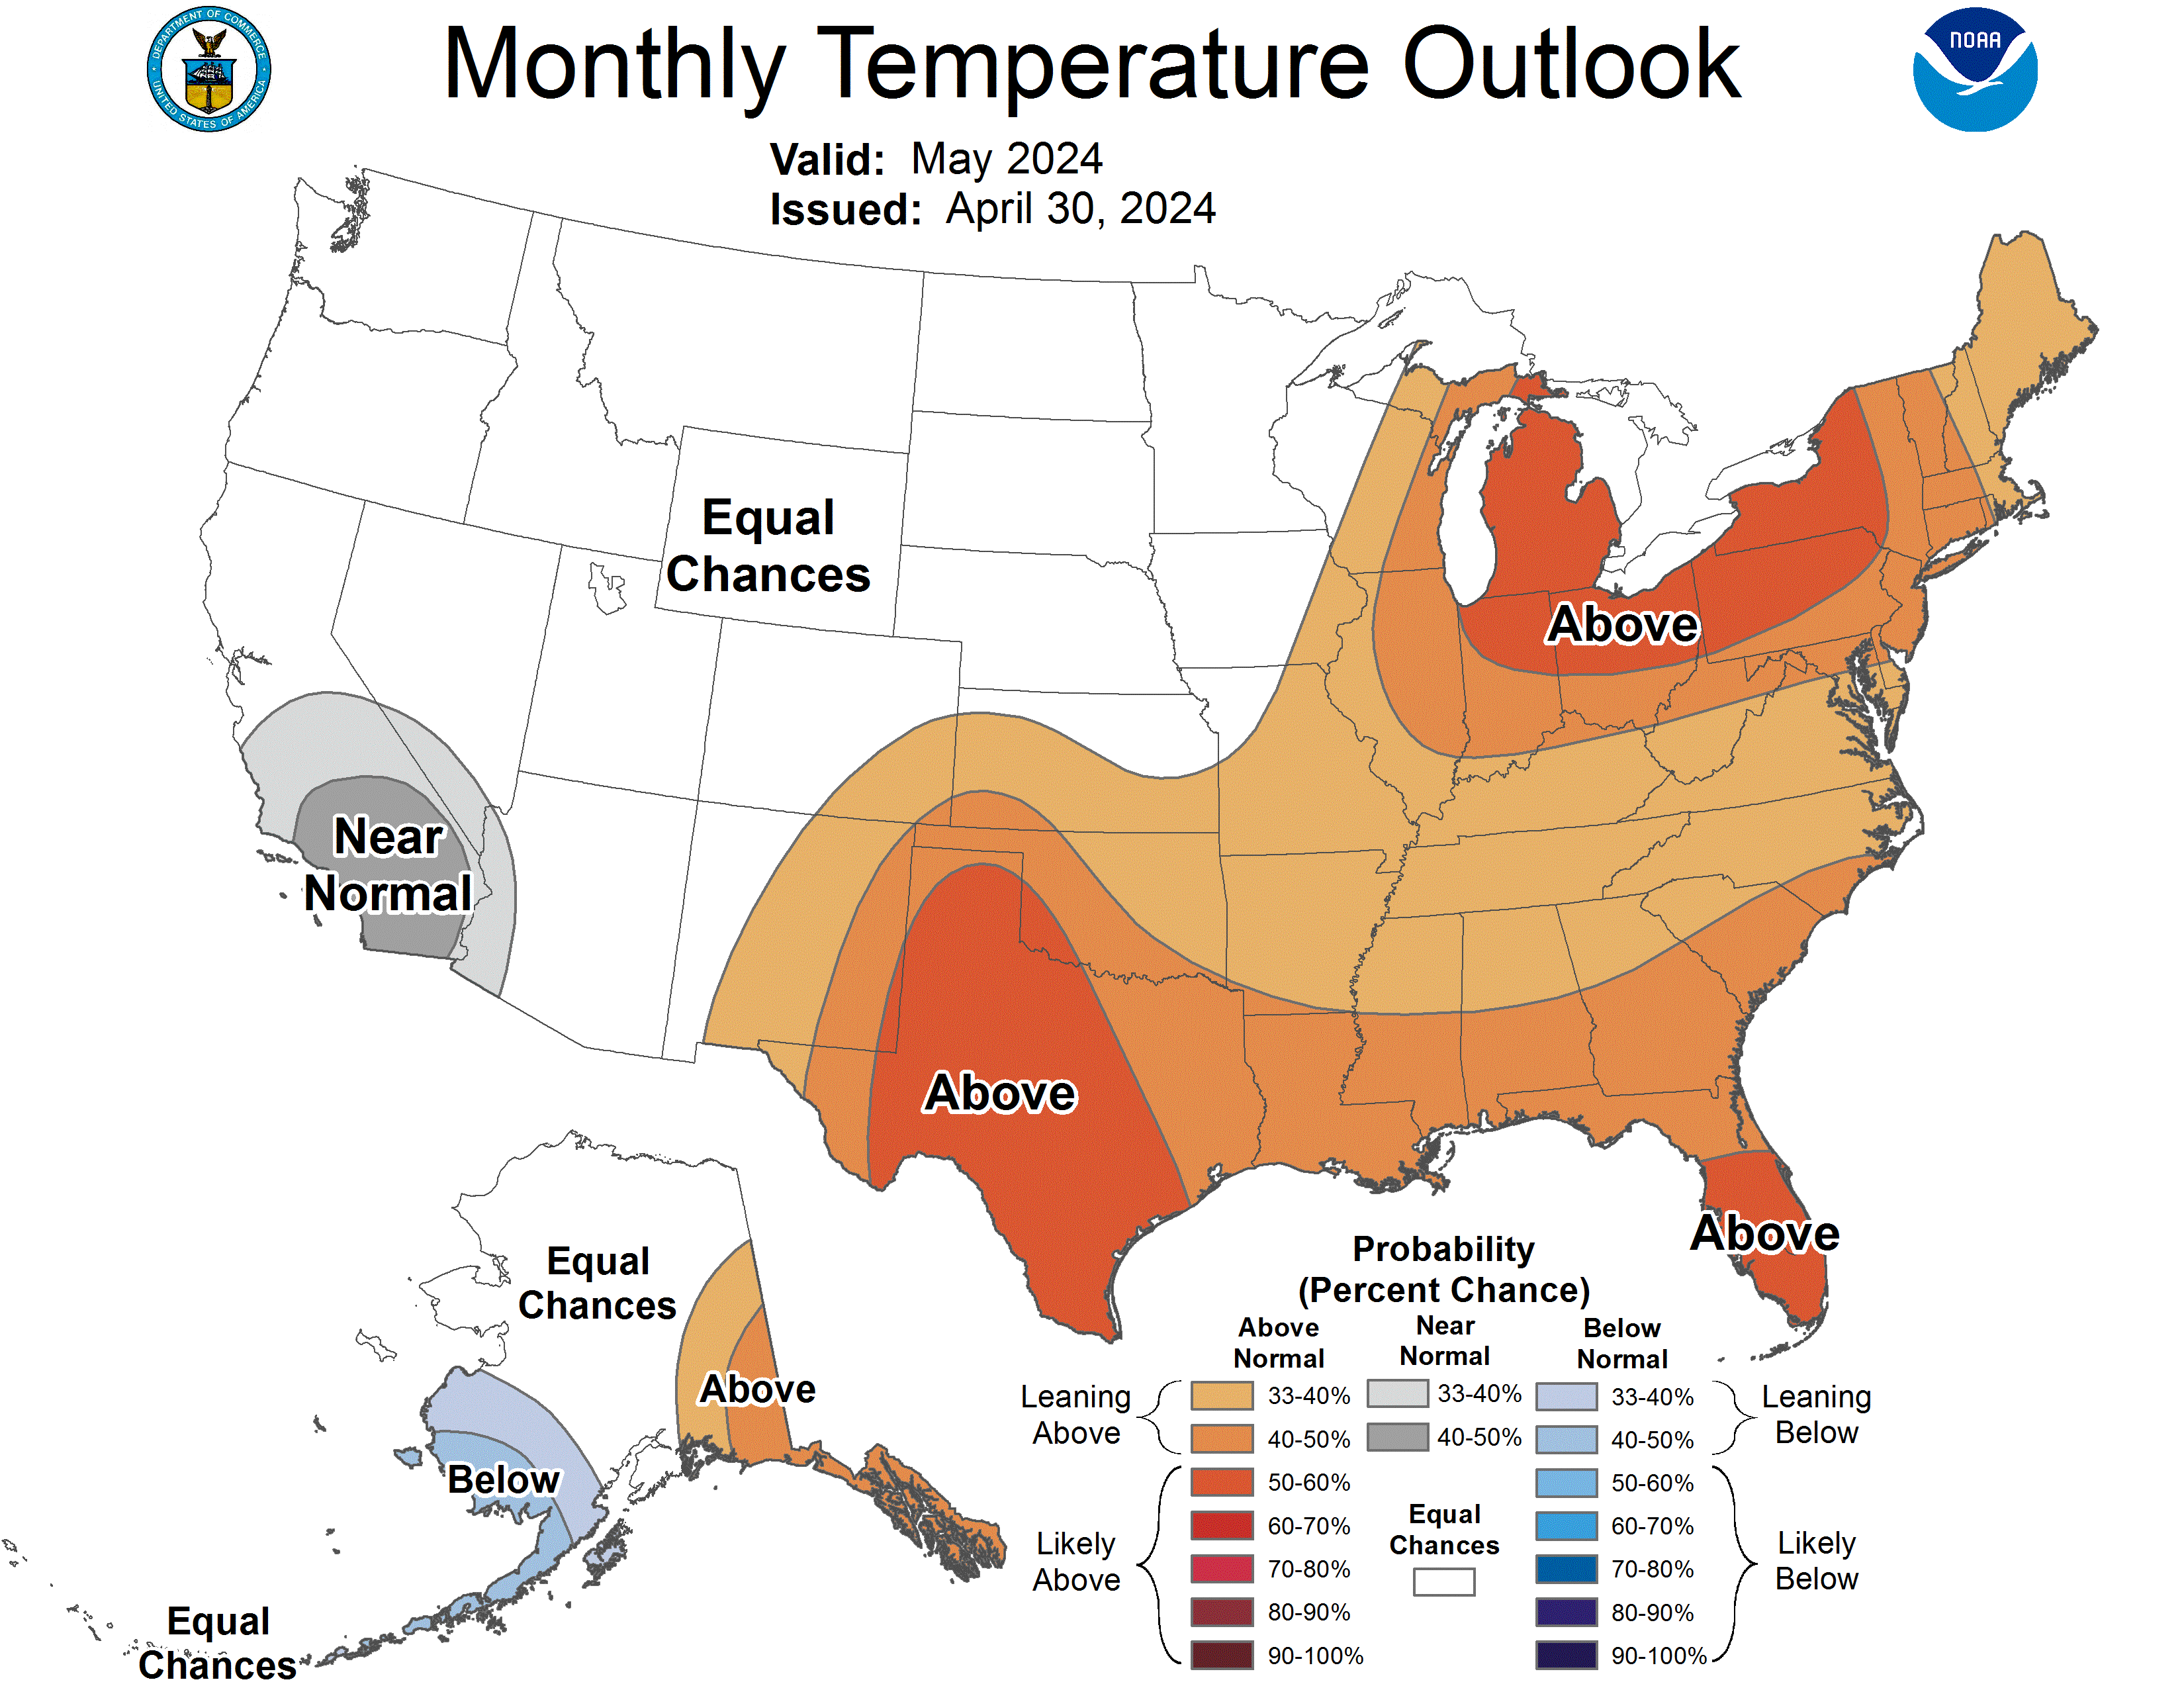 One month temperature outlook